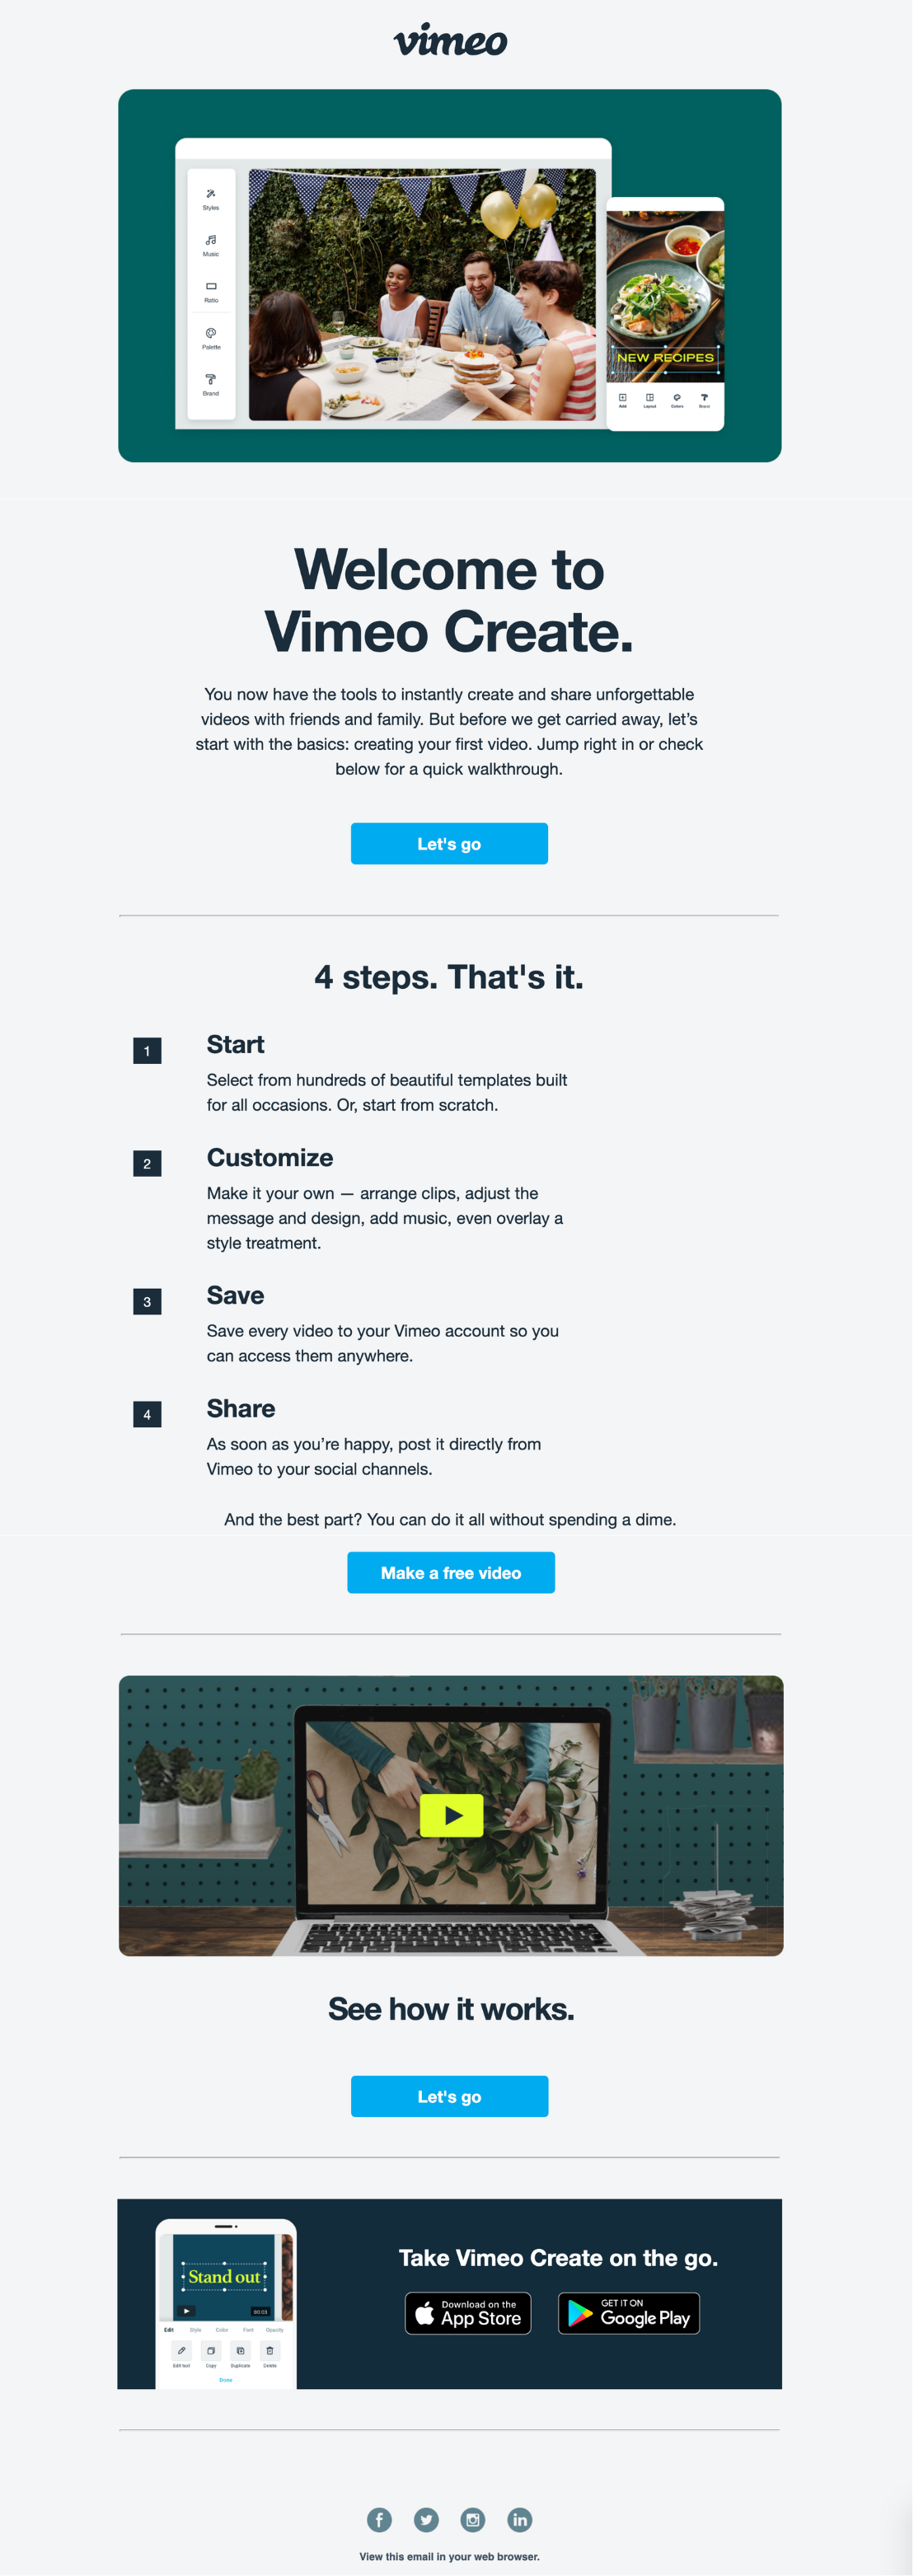 vimeo welcome emails